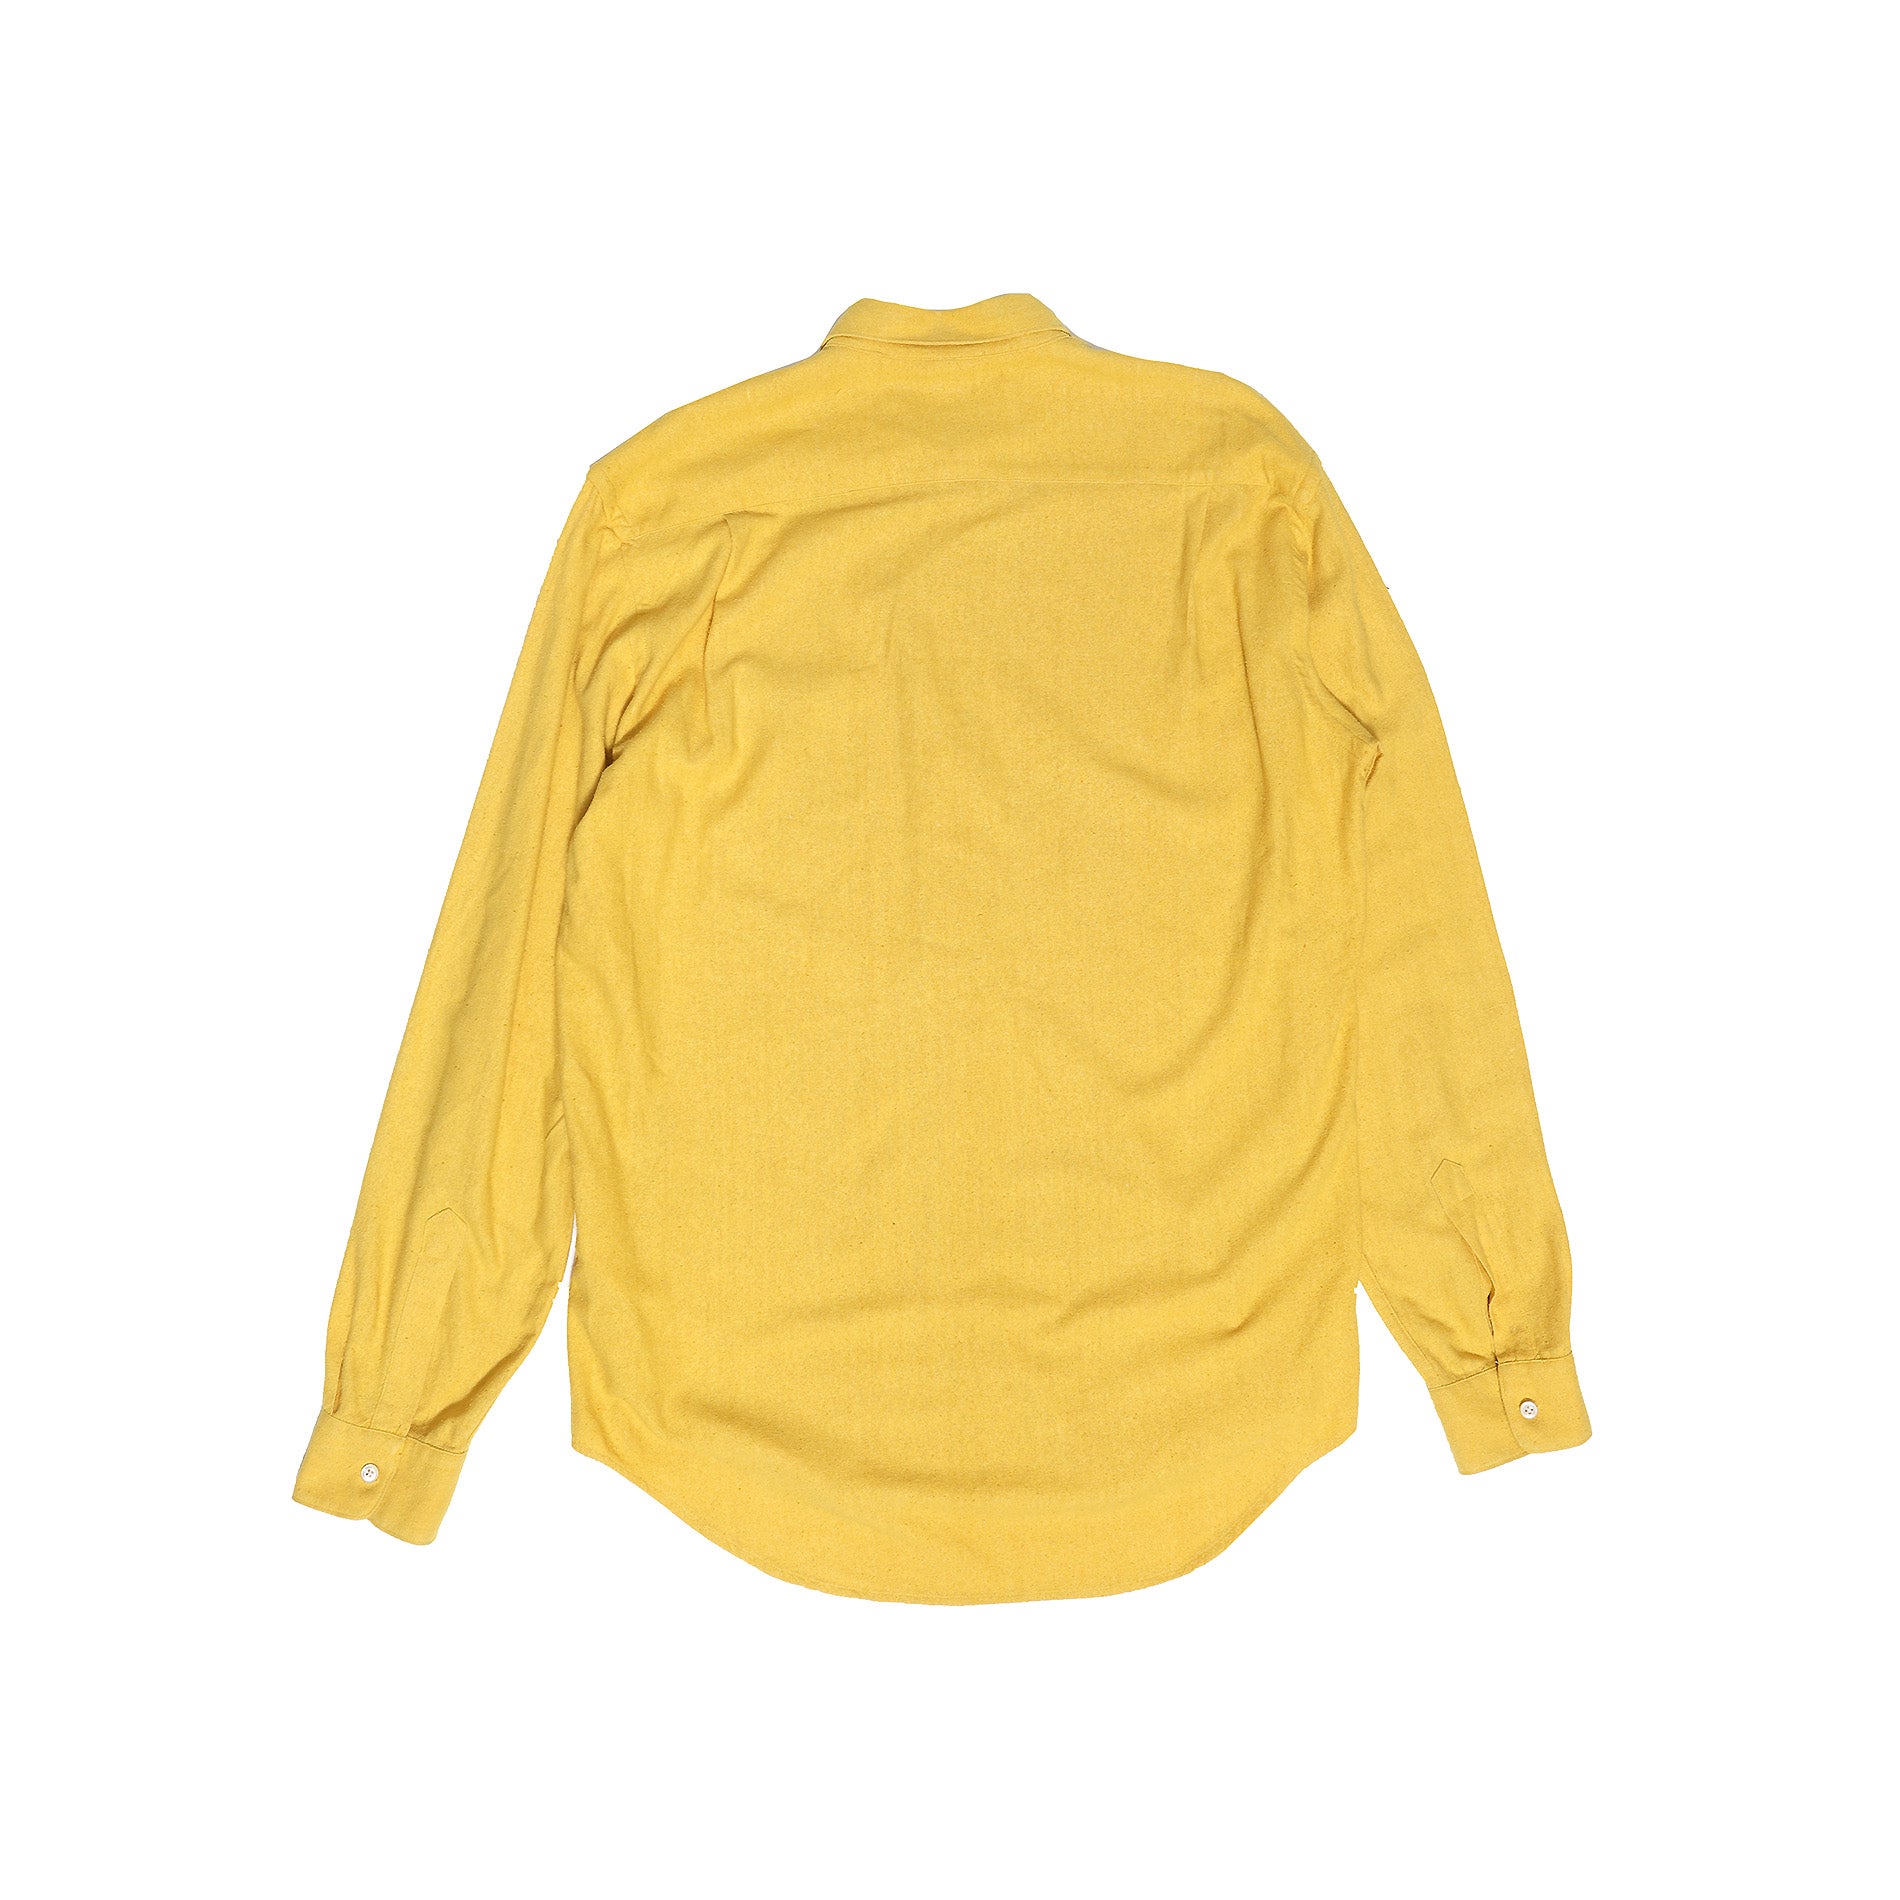 Our Legacy SS15 Mustard Shirting